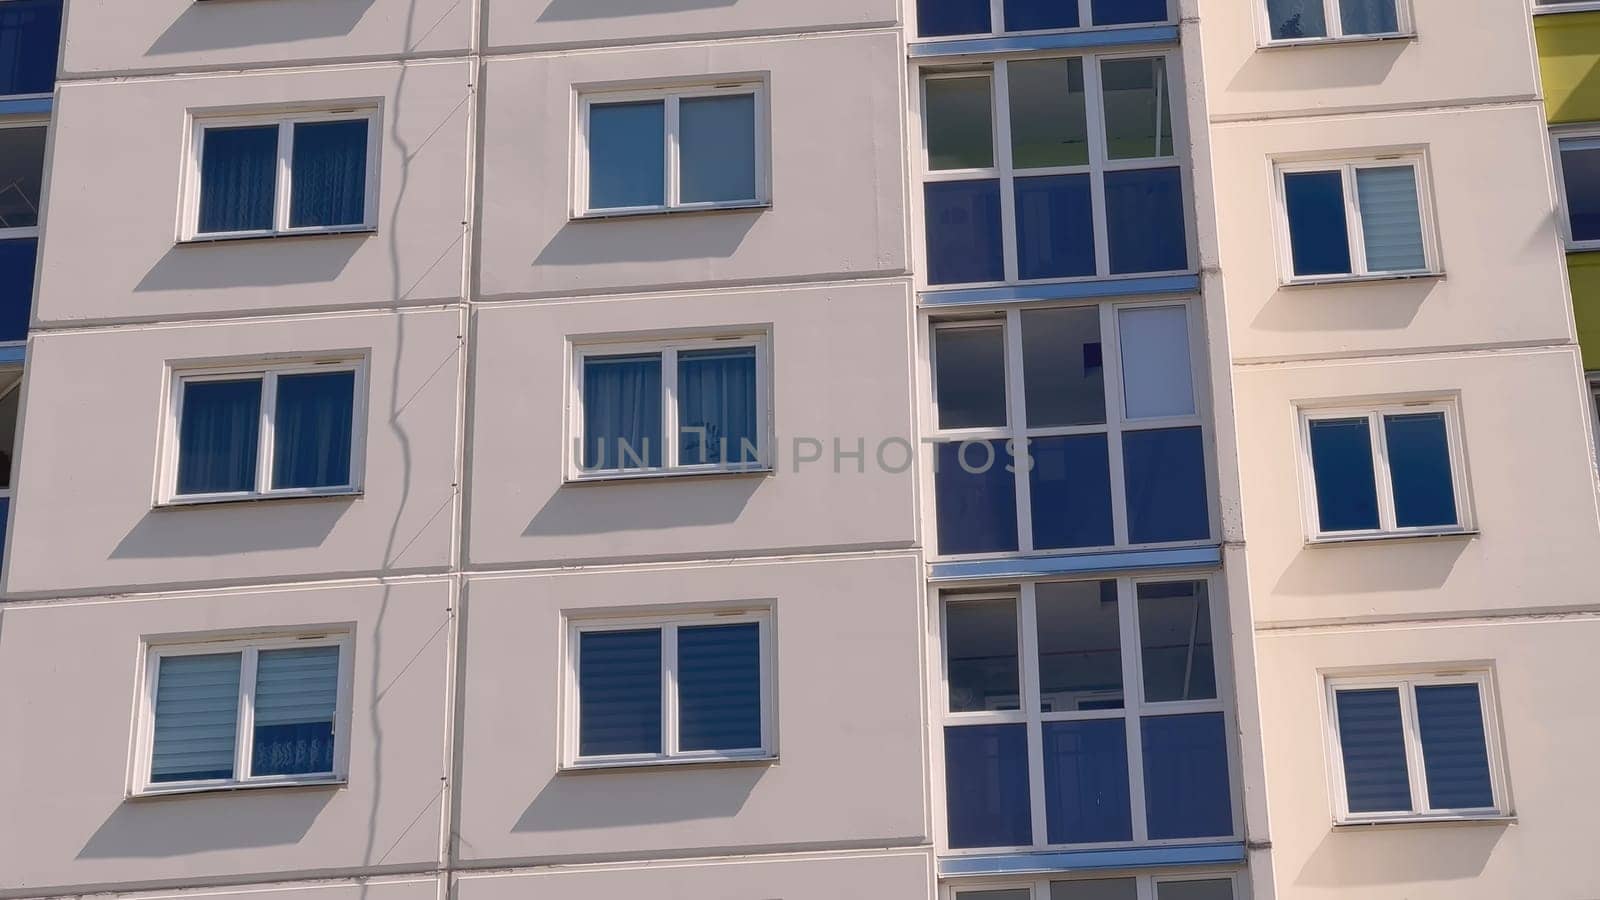 The windows of a residential high-rise building. by DovidPro